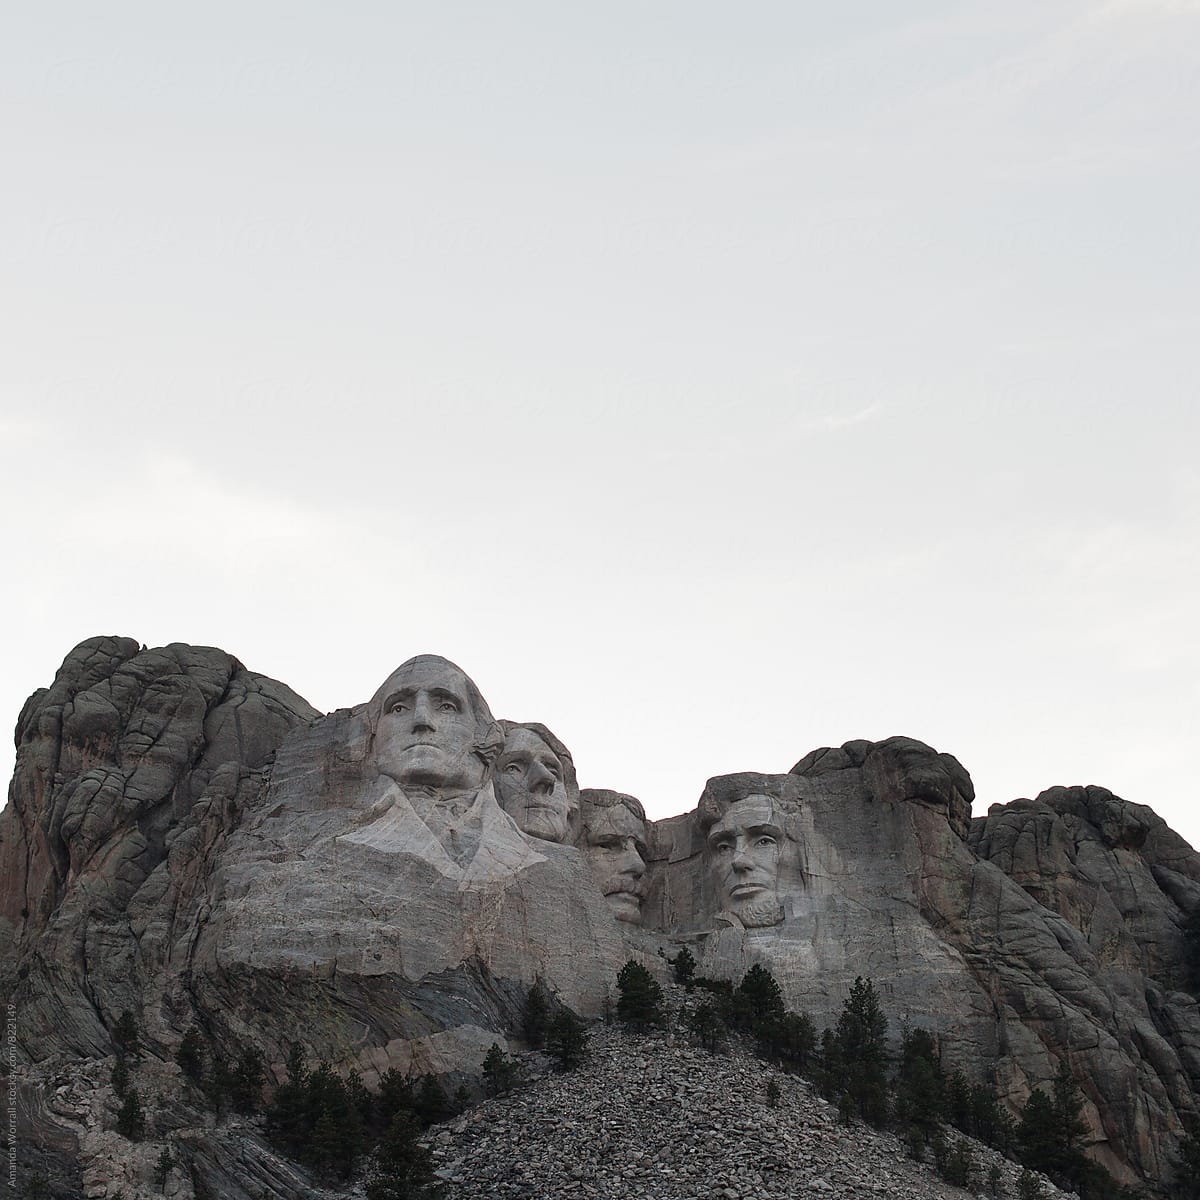 Mt. Rushmore on an overcast day